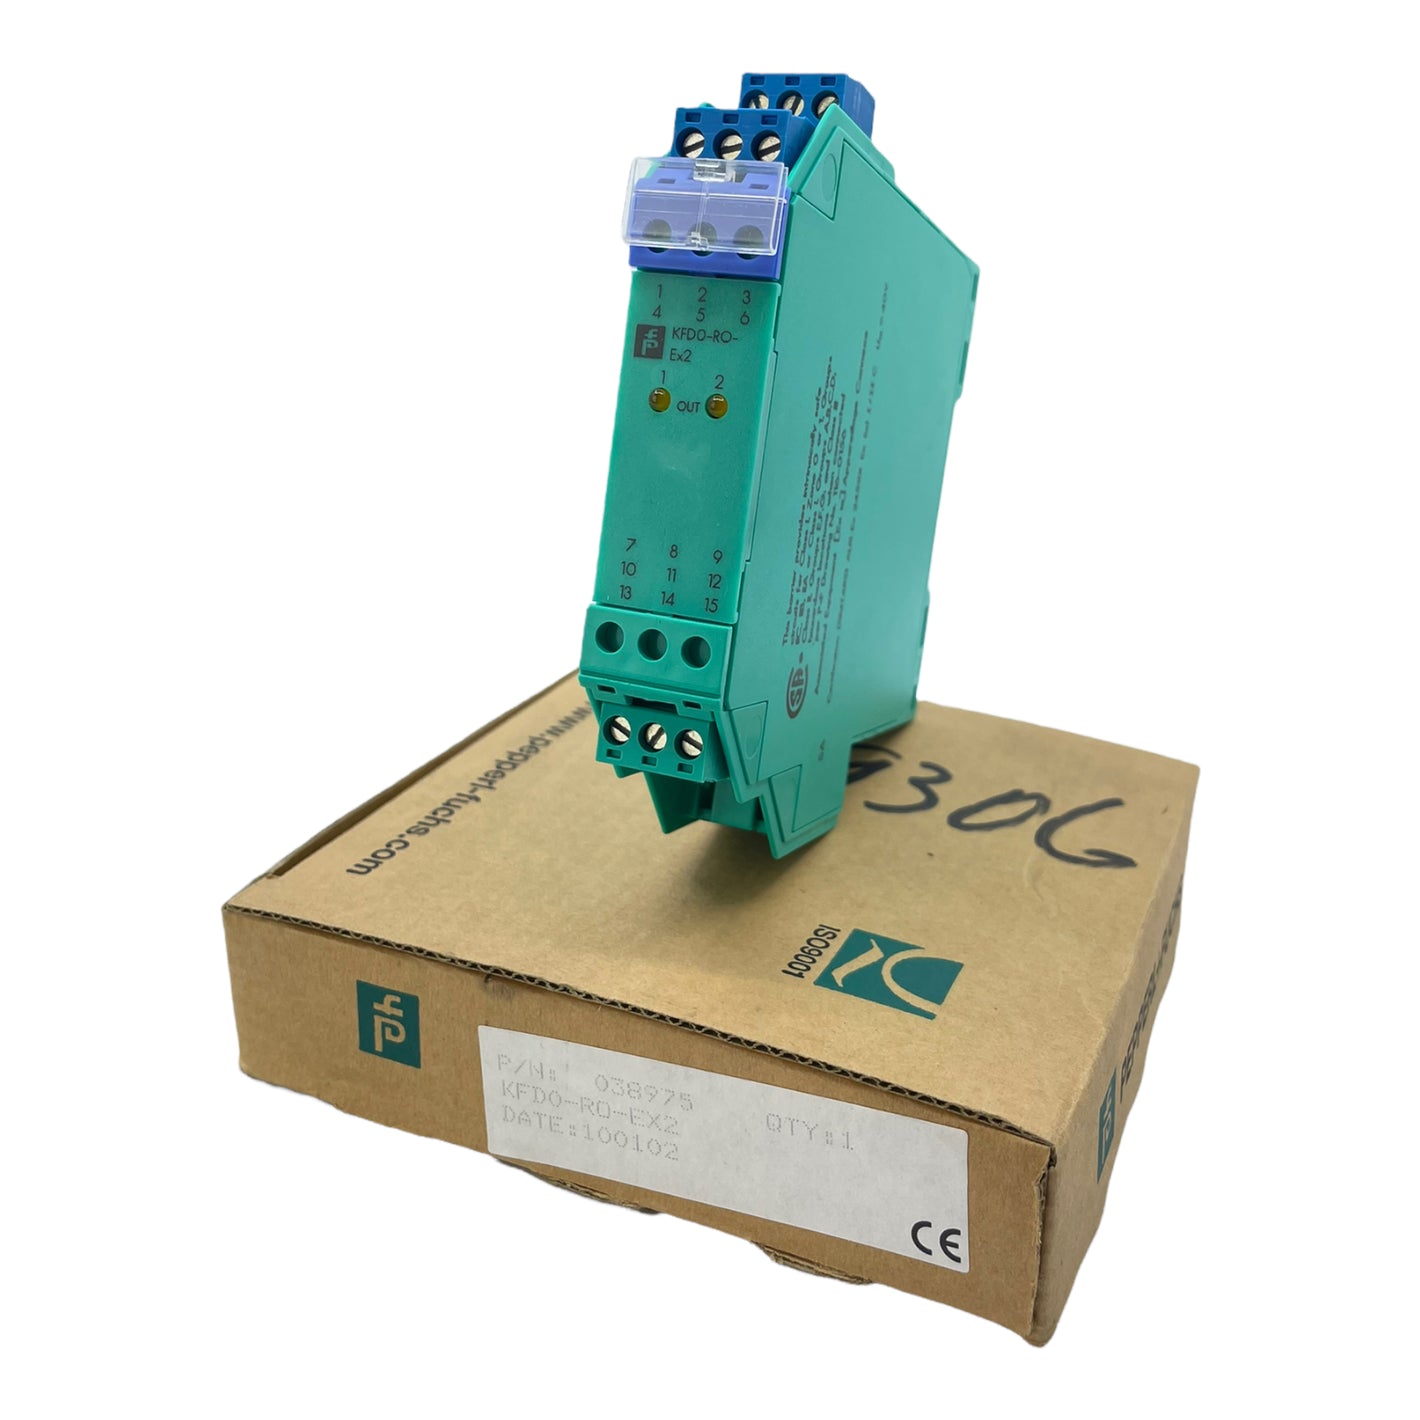 Pepperl+Fuchs KFD0-RO-EX2 relay module 2-channel isolated barrier 